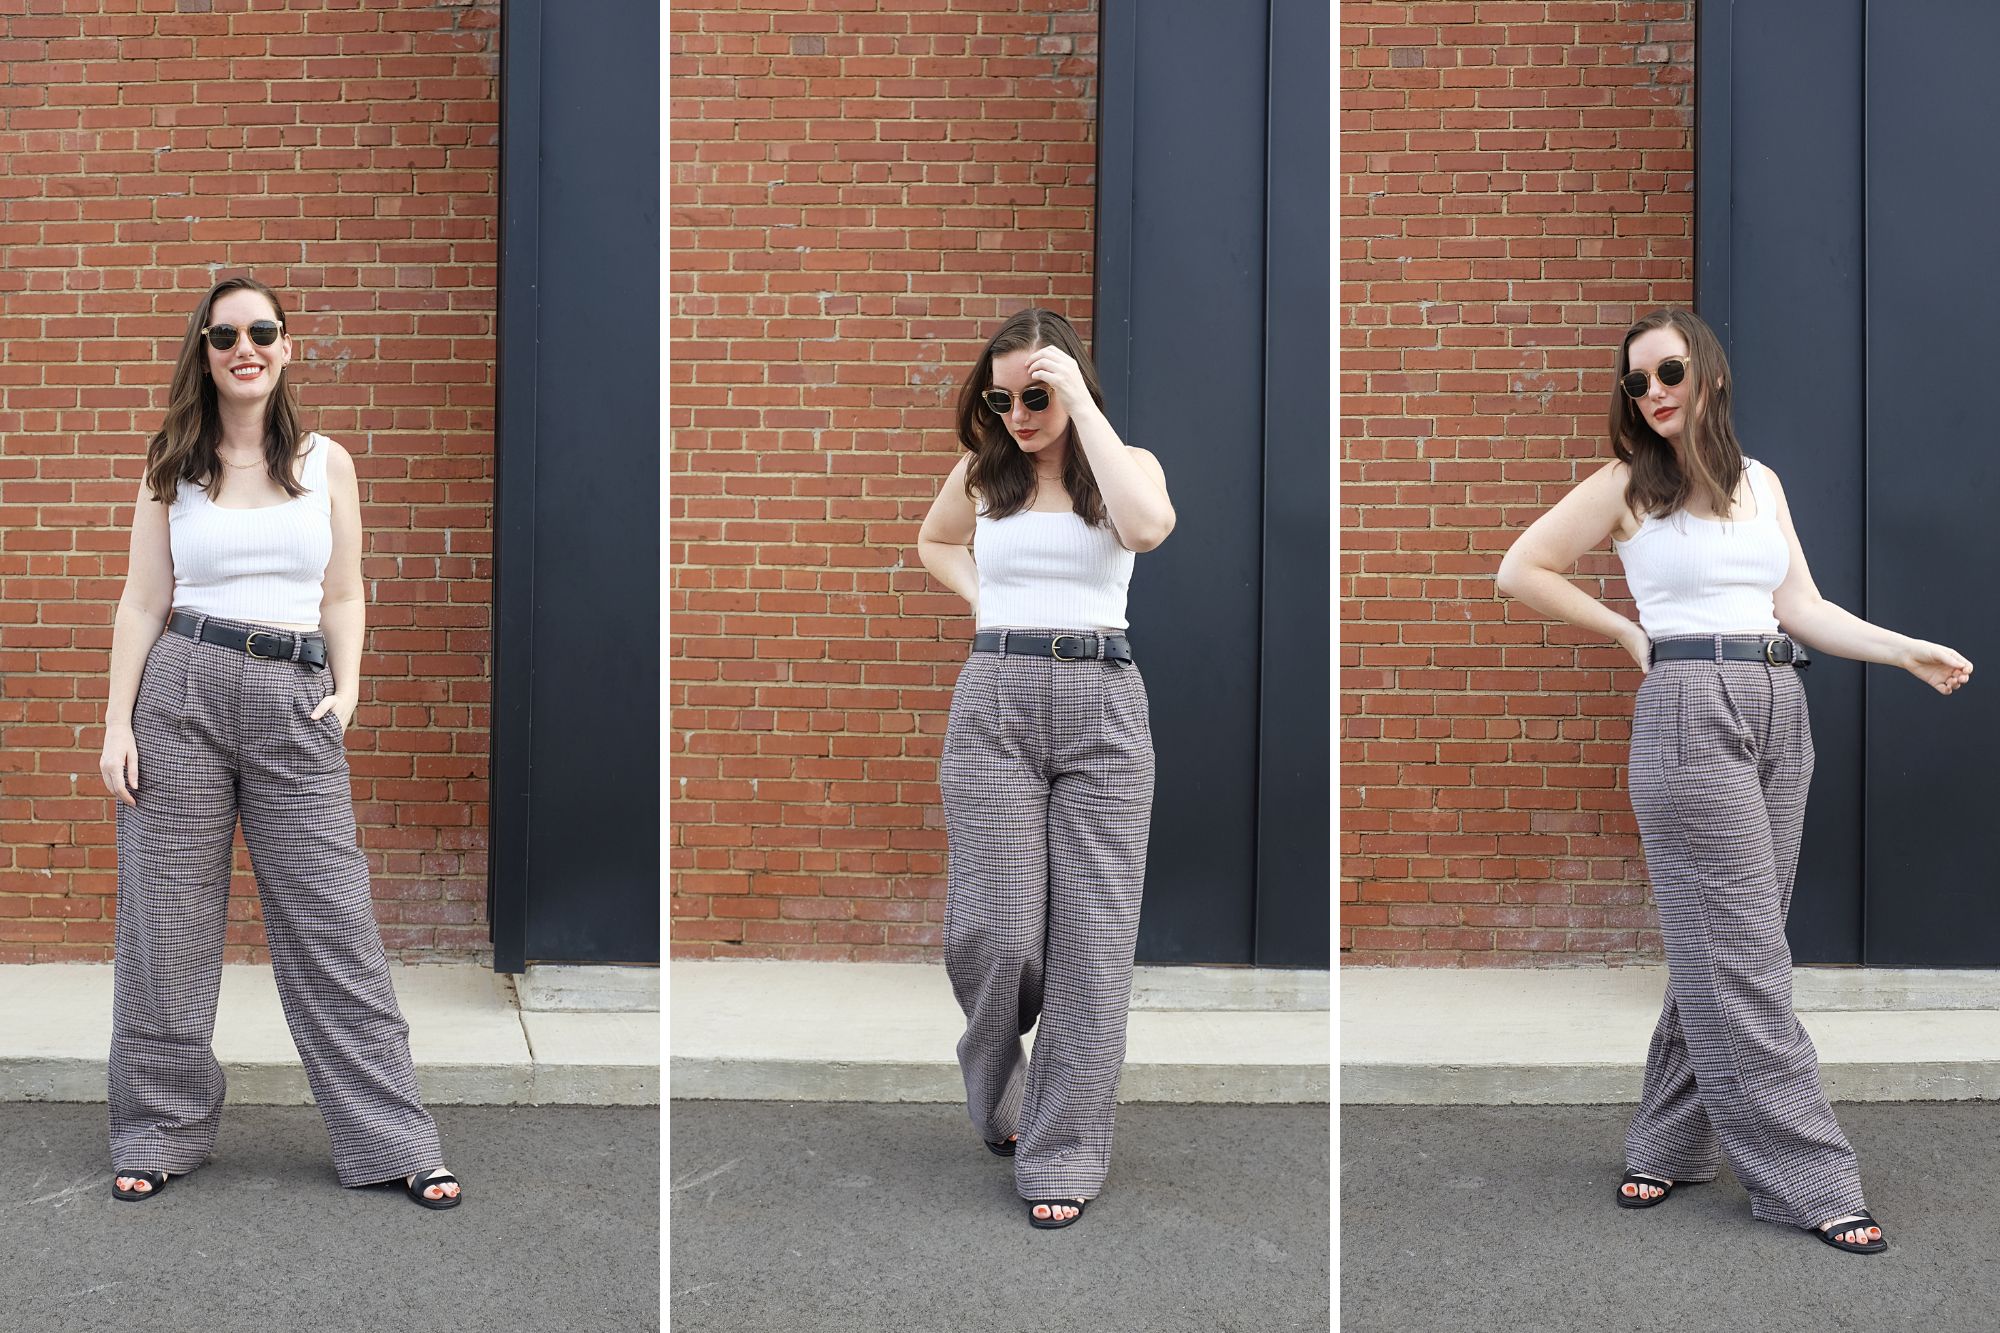 Everlane Corduroy Pant and Boss Bootie Review - Jeans and a Teacup